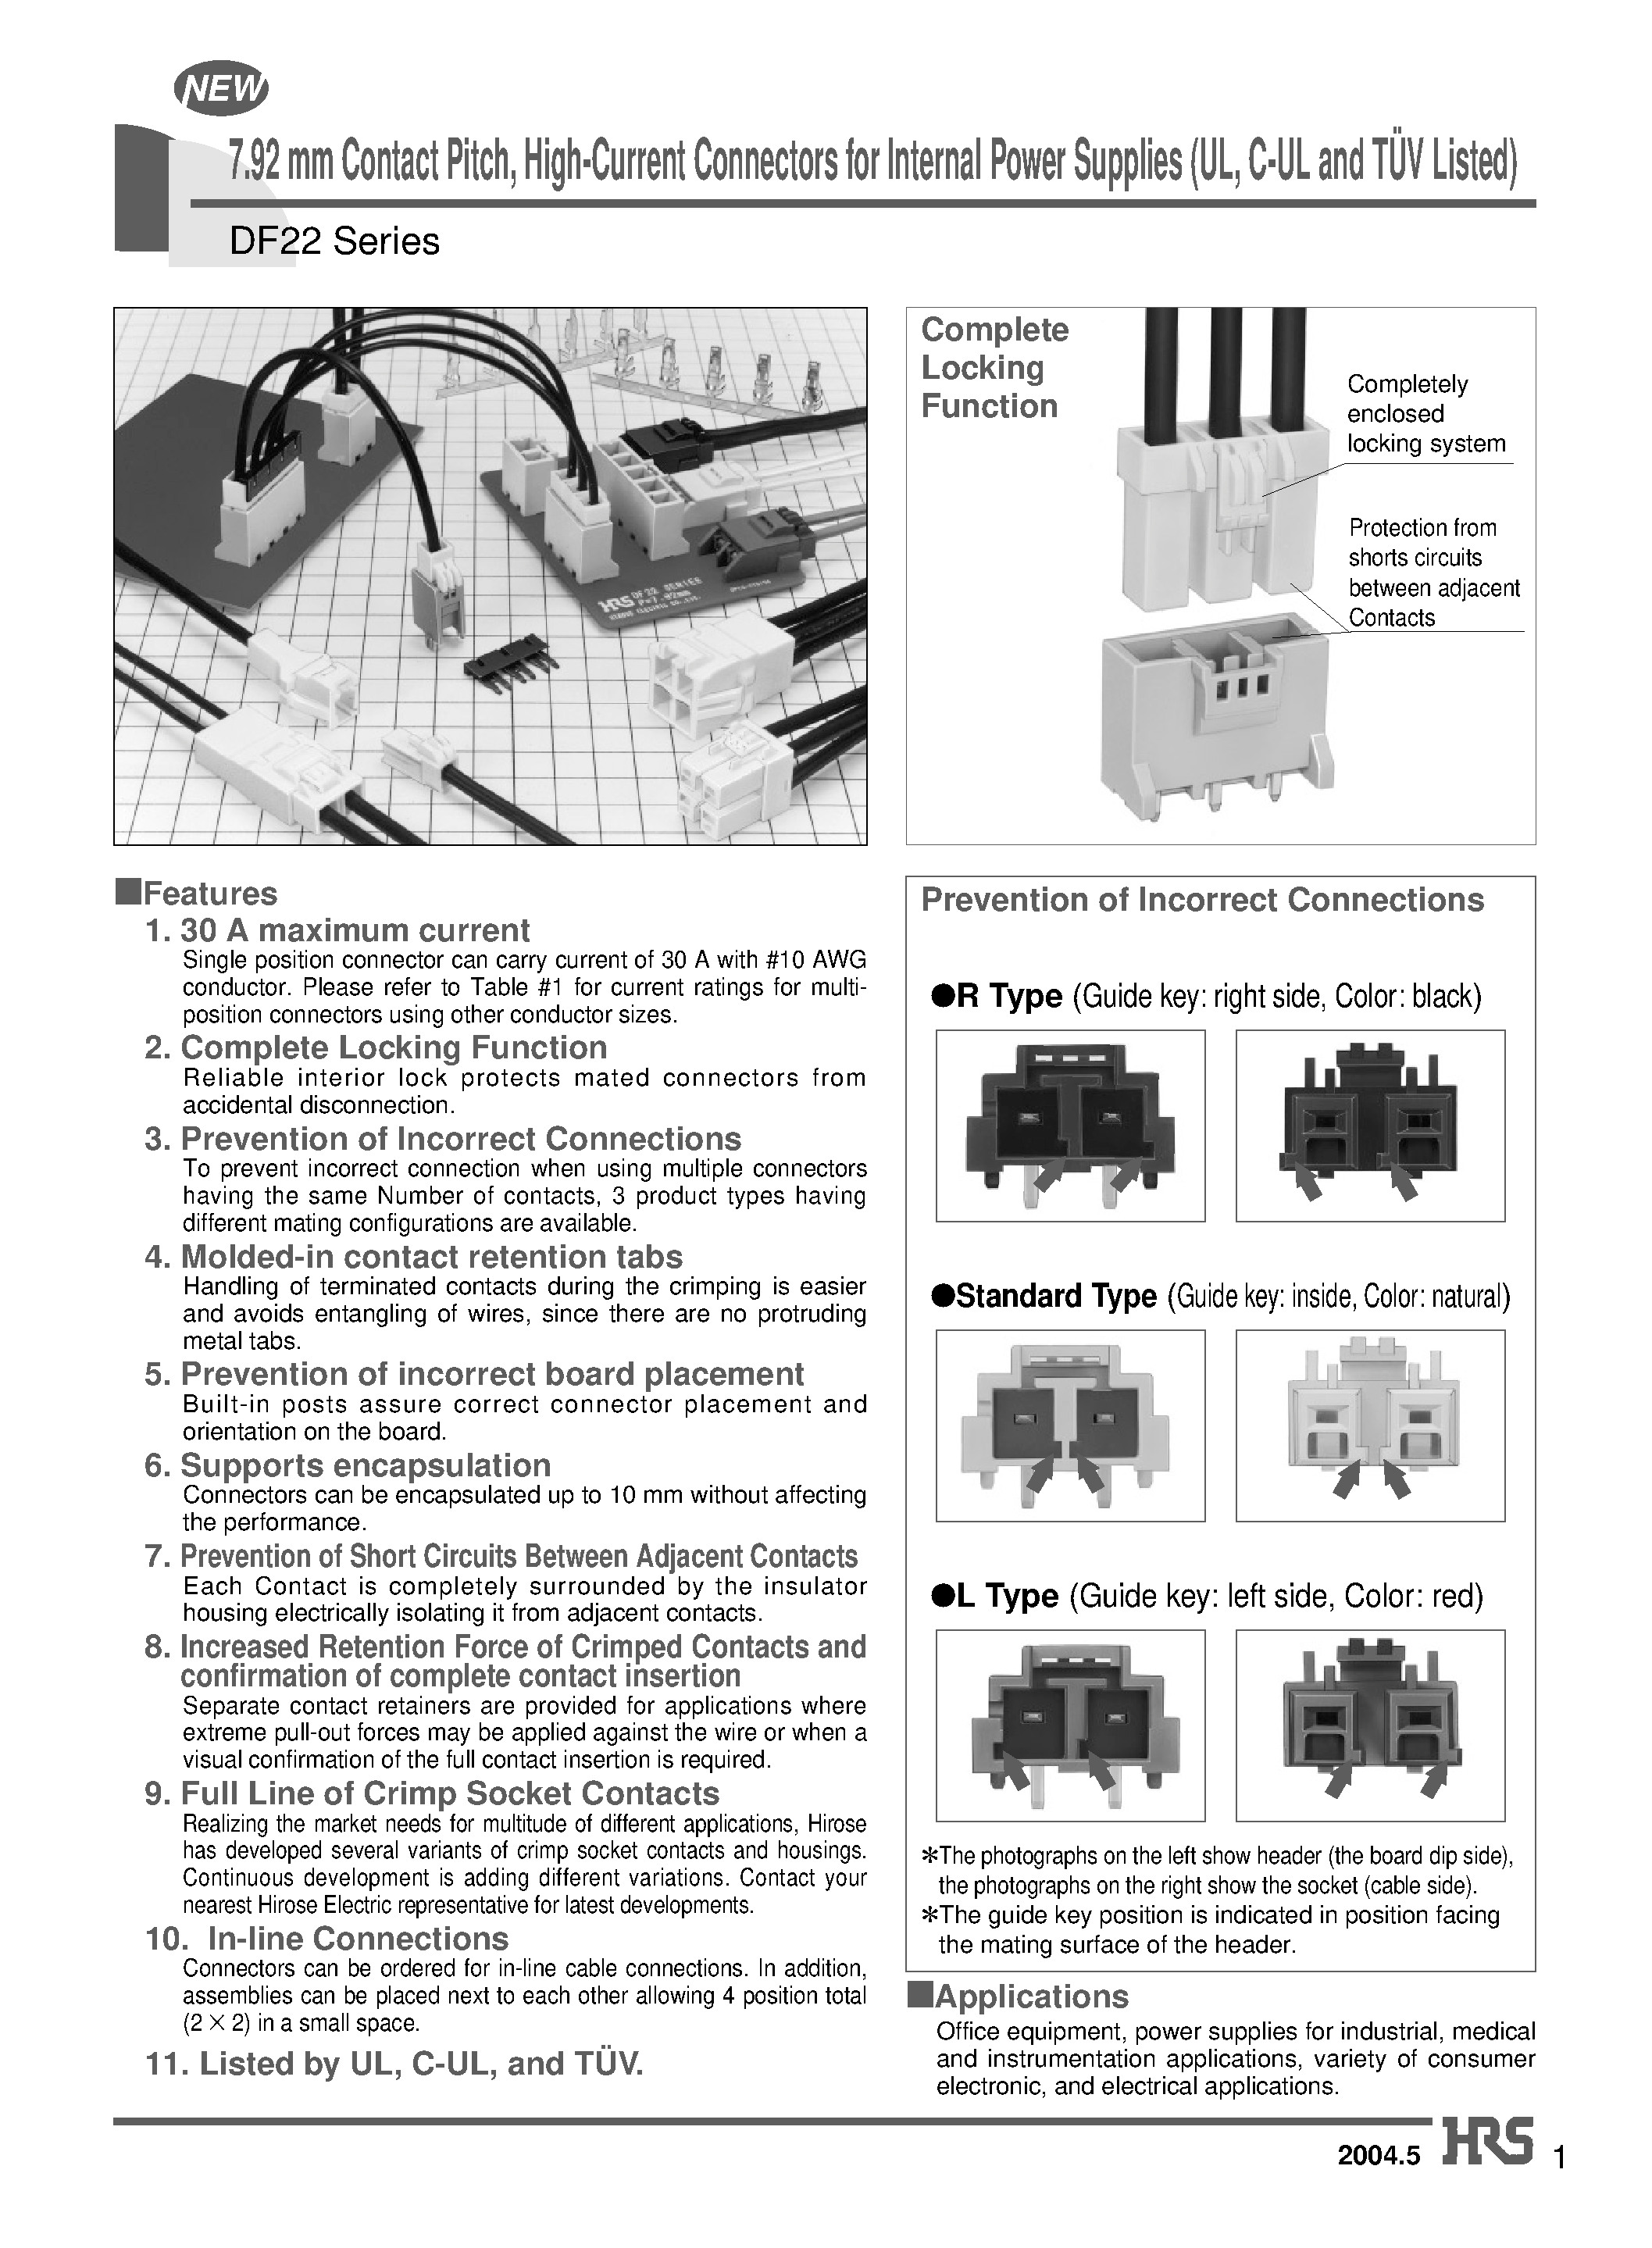 Datasheet DF22-1DEP-7.92DSA - 7.92 mm Contact Pitch/ High-Current Connectors for Internal Power Supplies (UL/ C-UL and TUV Listed) page 1